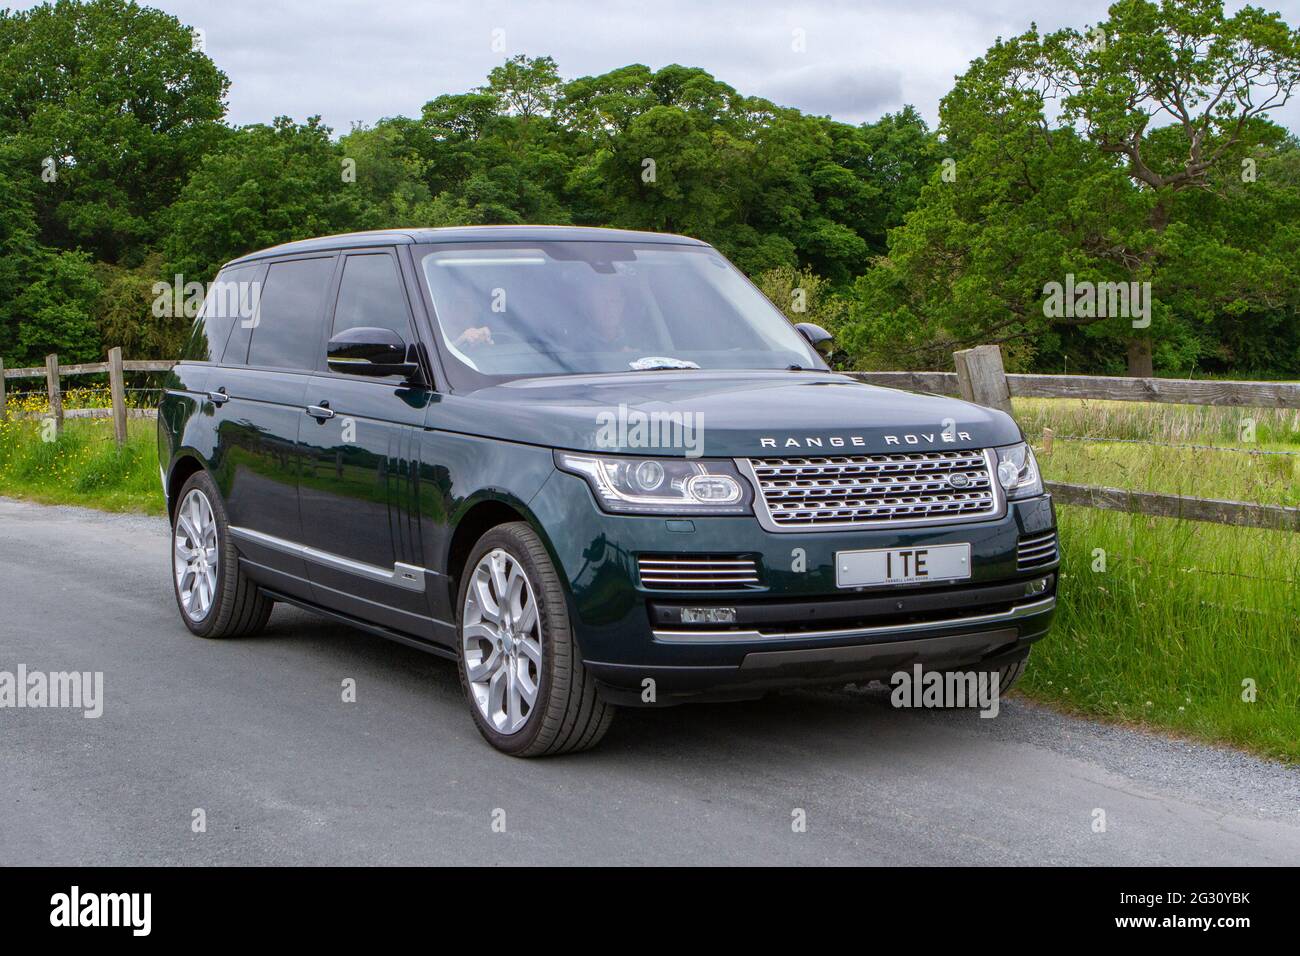 Land Rover Range Rover Green Autobiography Electric Diesel Annual Manchester to Blackpool Vintage & Classic Car Stock Photo